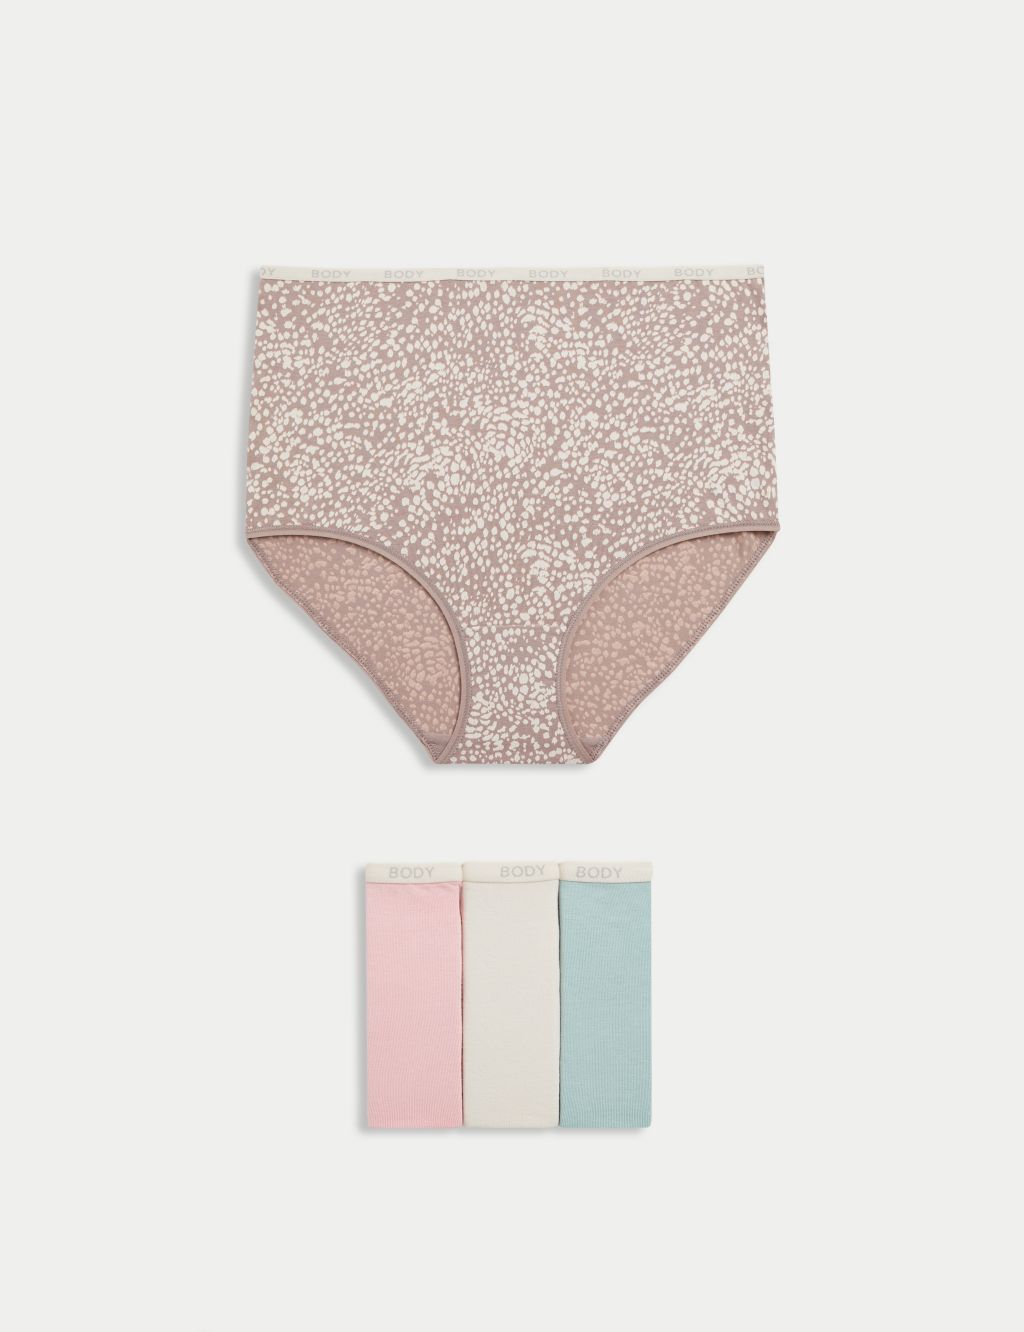 Other, Other Light Control Nude Shimmer Effect High Waist Knickers, Nude